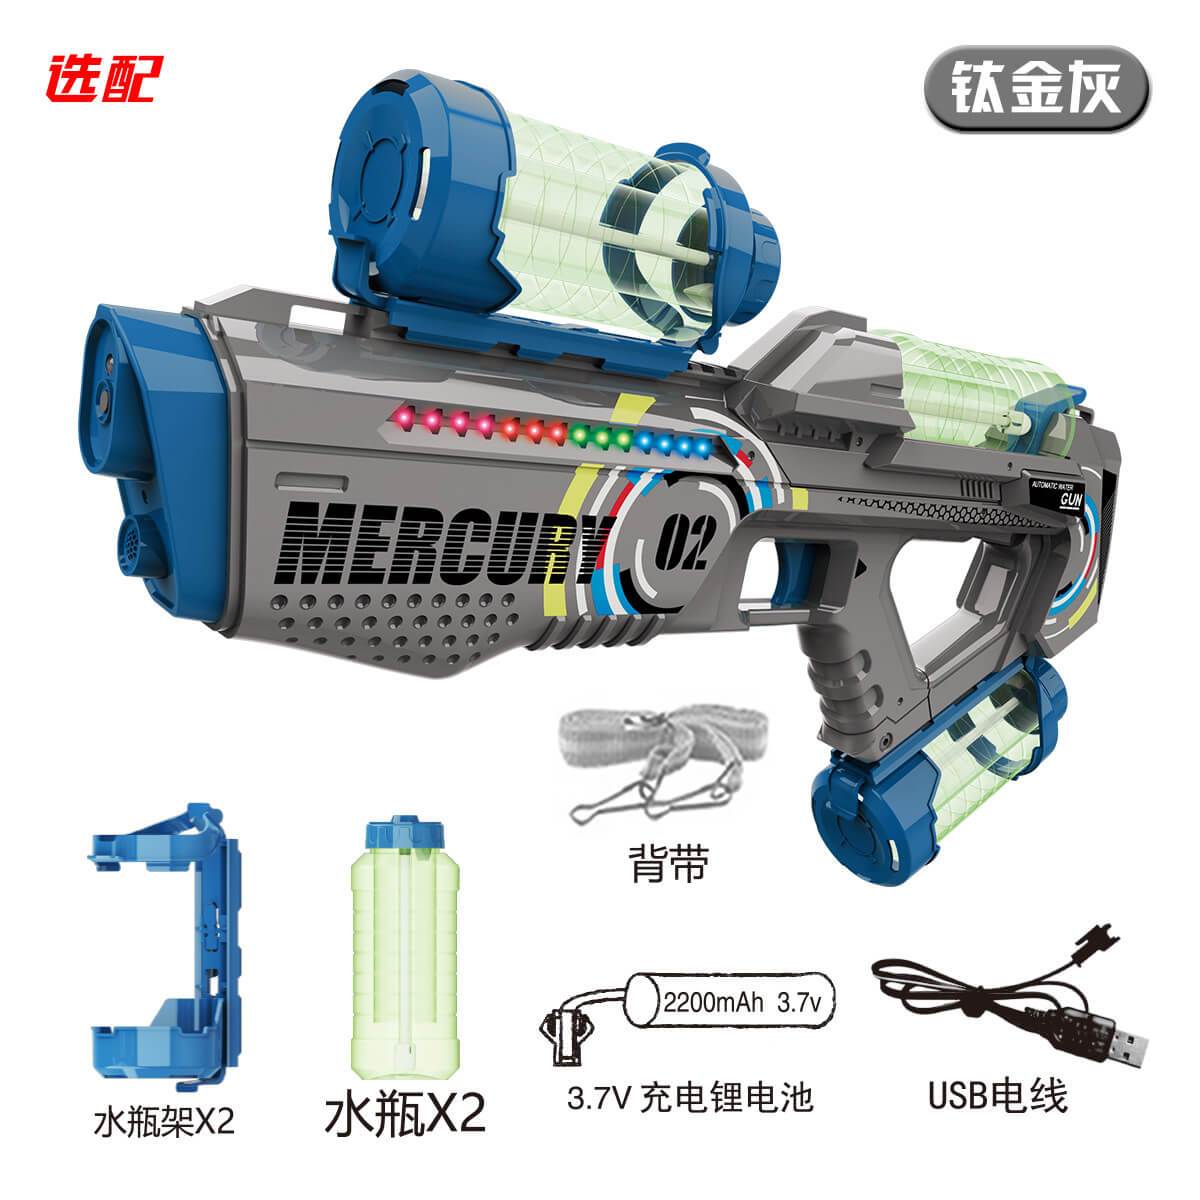 New Auto Led Space Water Gun Fast Shooting - BOOST TOYS